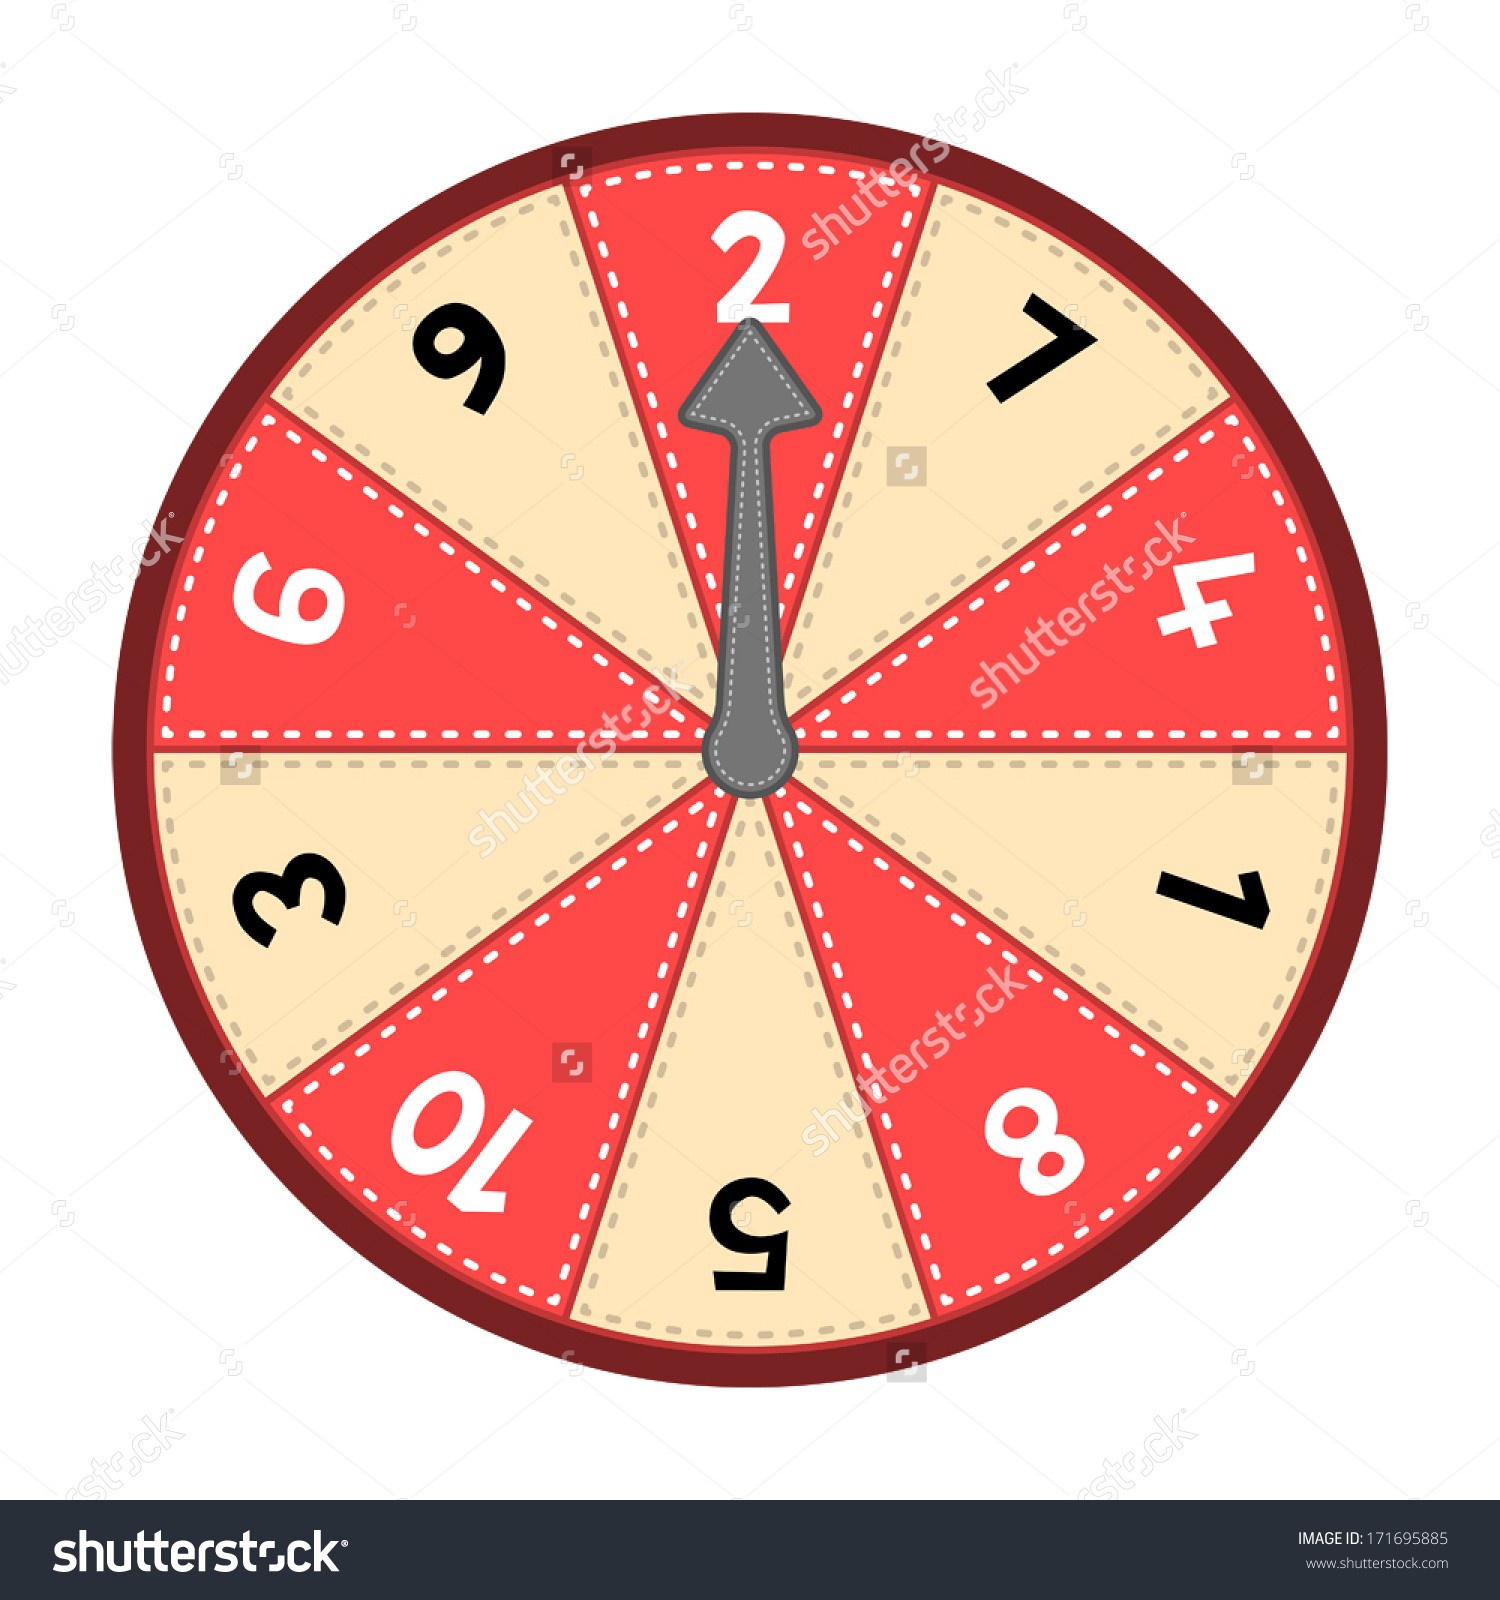 Spin the Wheel Game Template